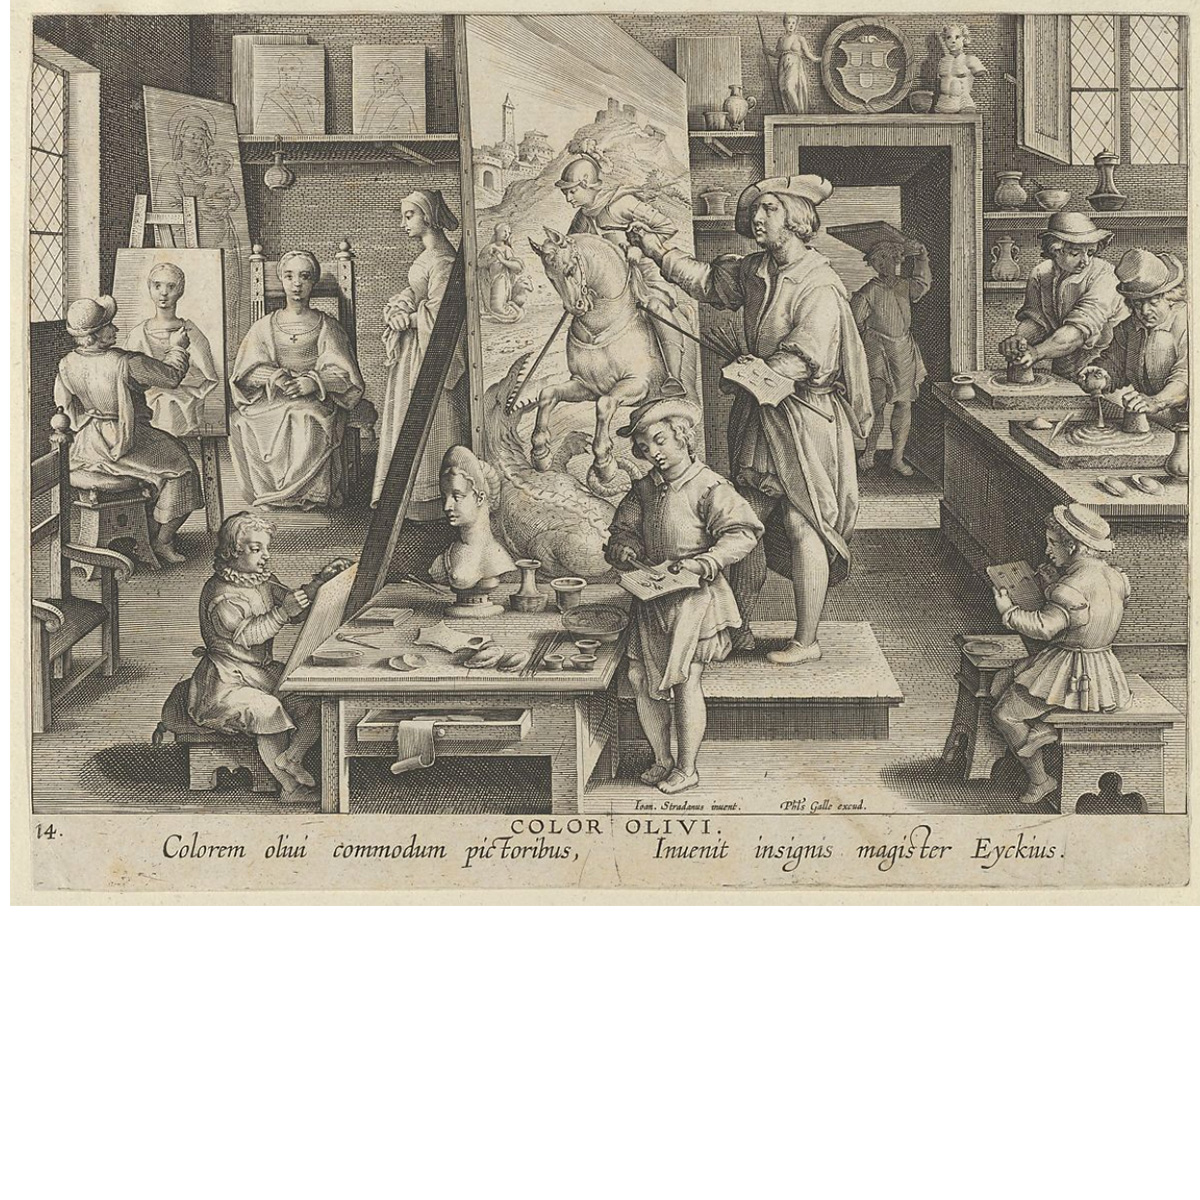 Print of many painters working in their studio.